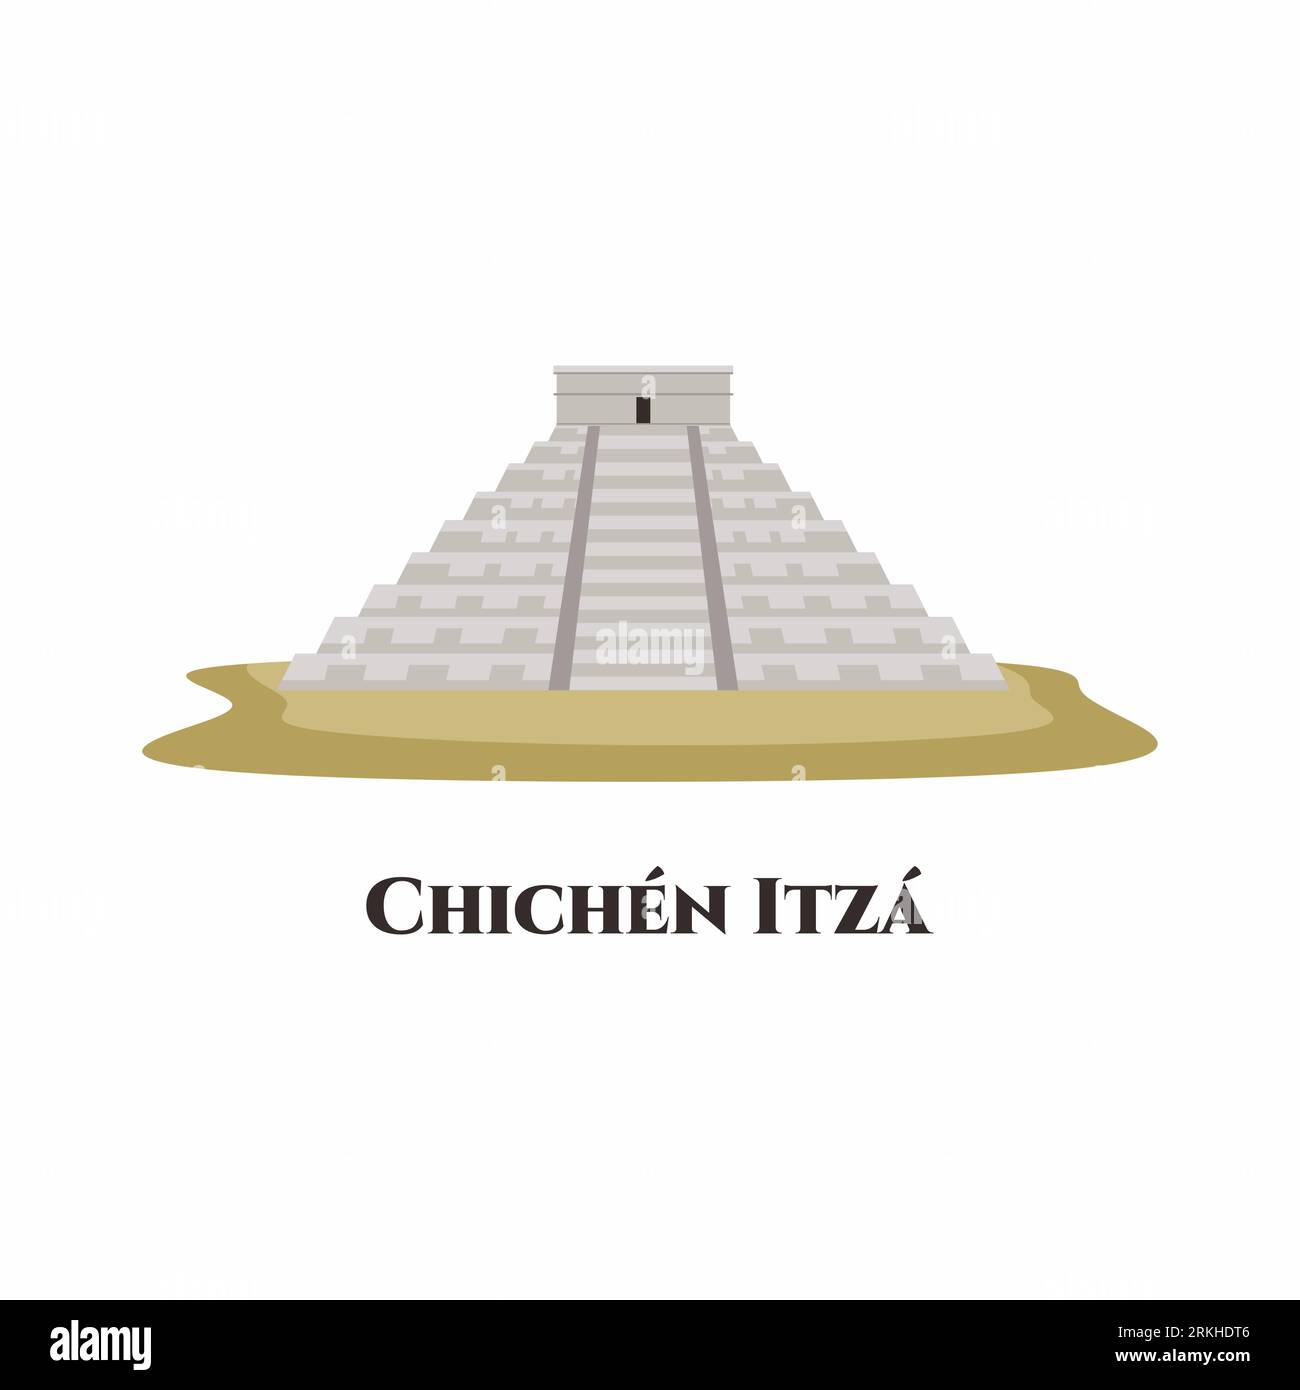 Chichen Itza. The archaeological site in Tinúm Municipality, Yucatán State, Mexico. Mayan pyramid of Kukulcan El Castillo. City travel landmarks, tour Stock Vector